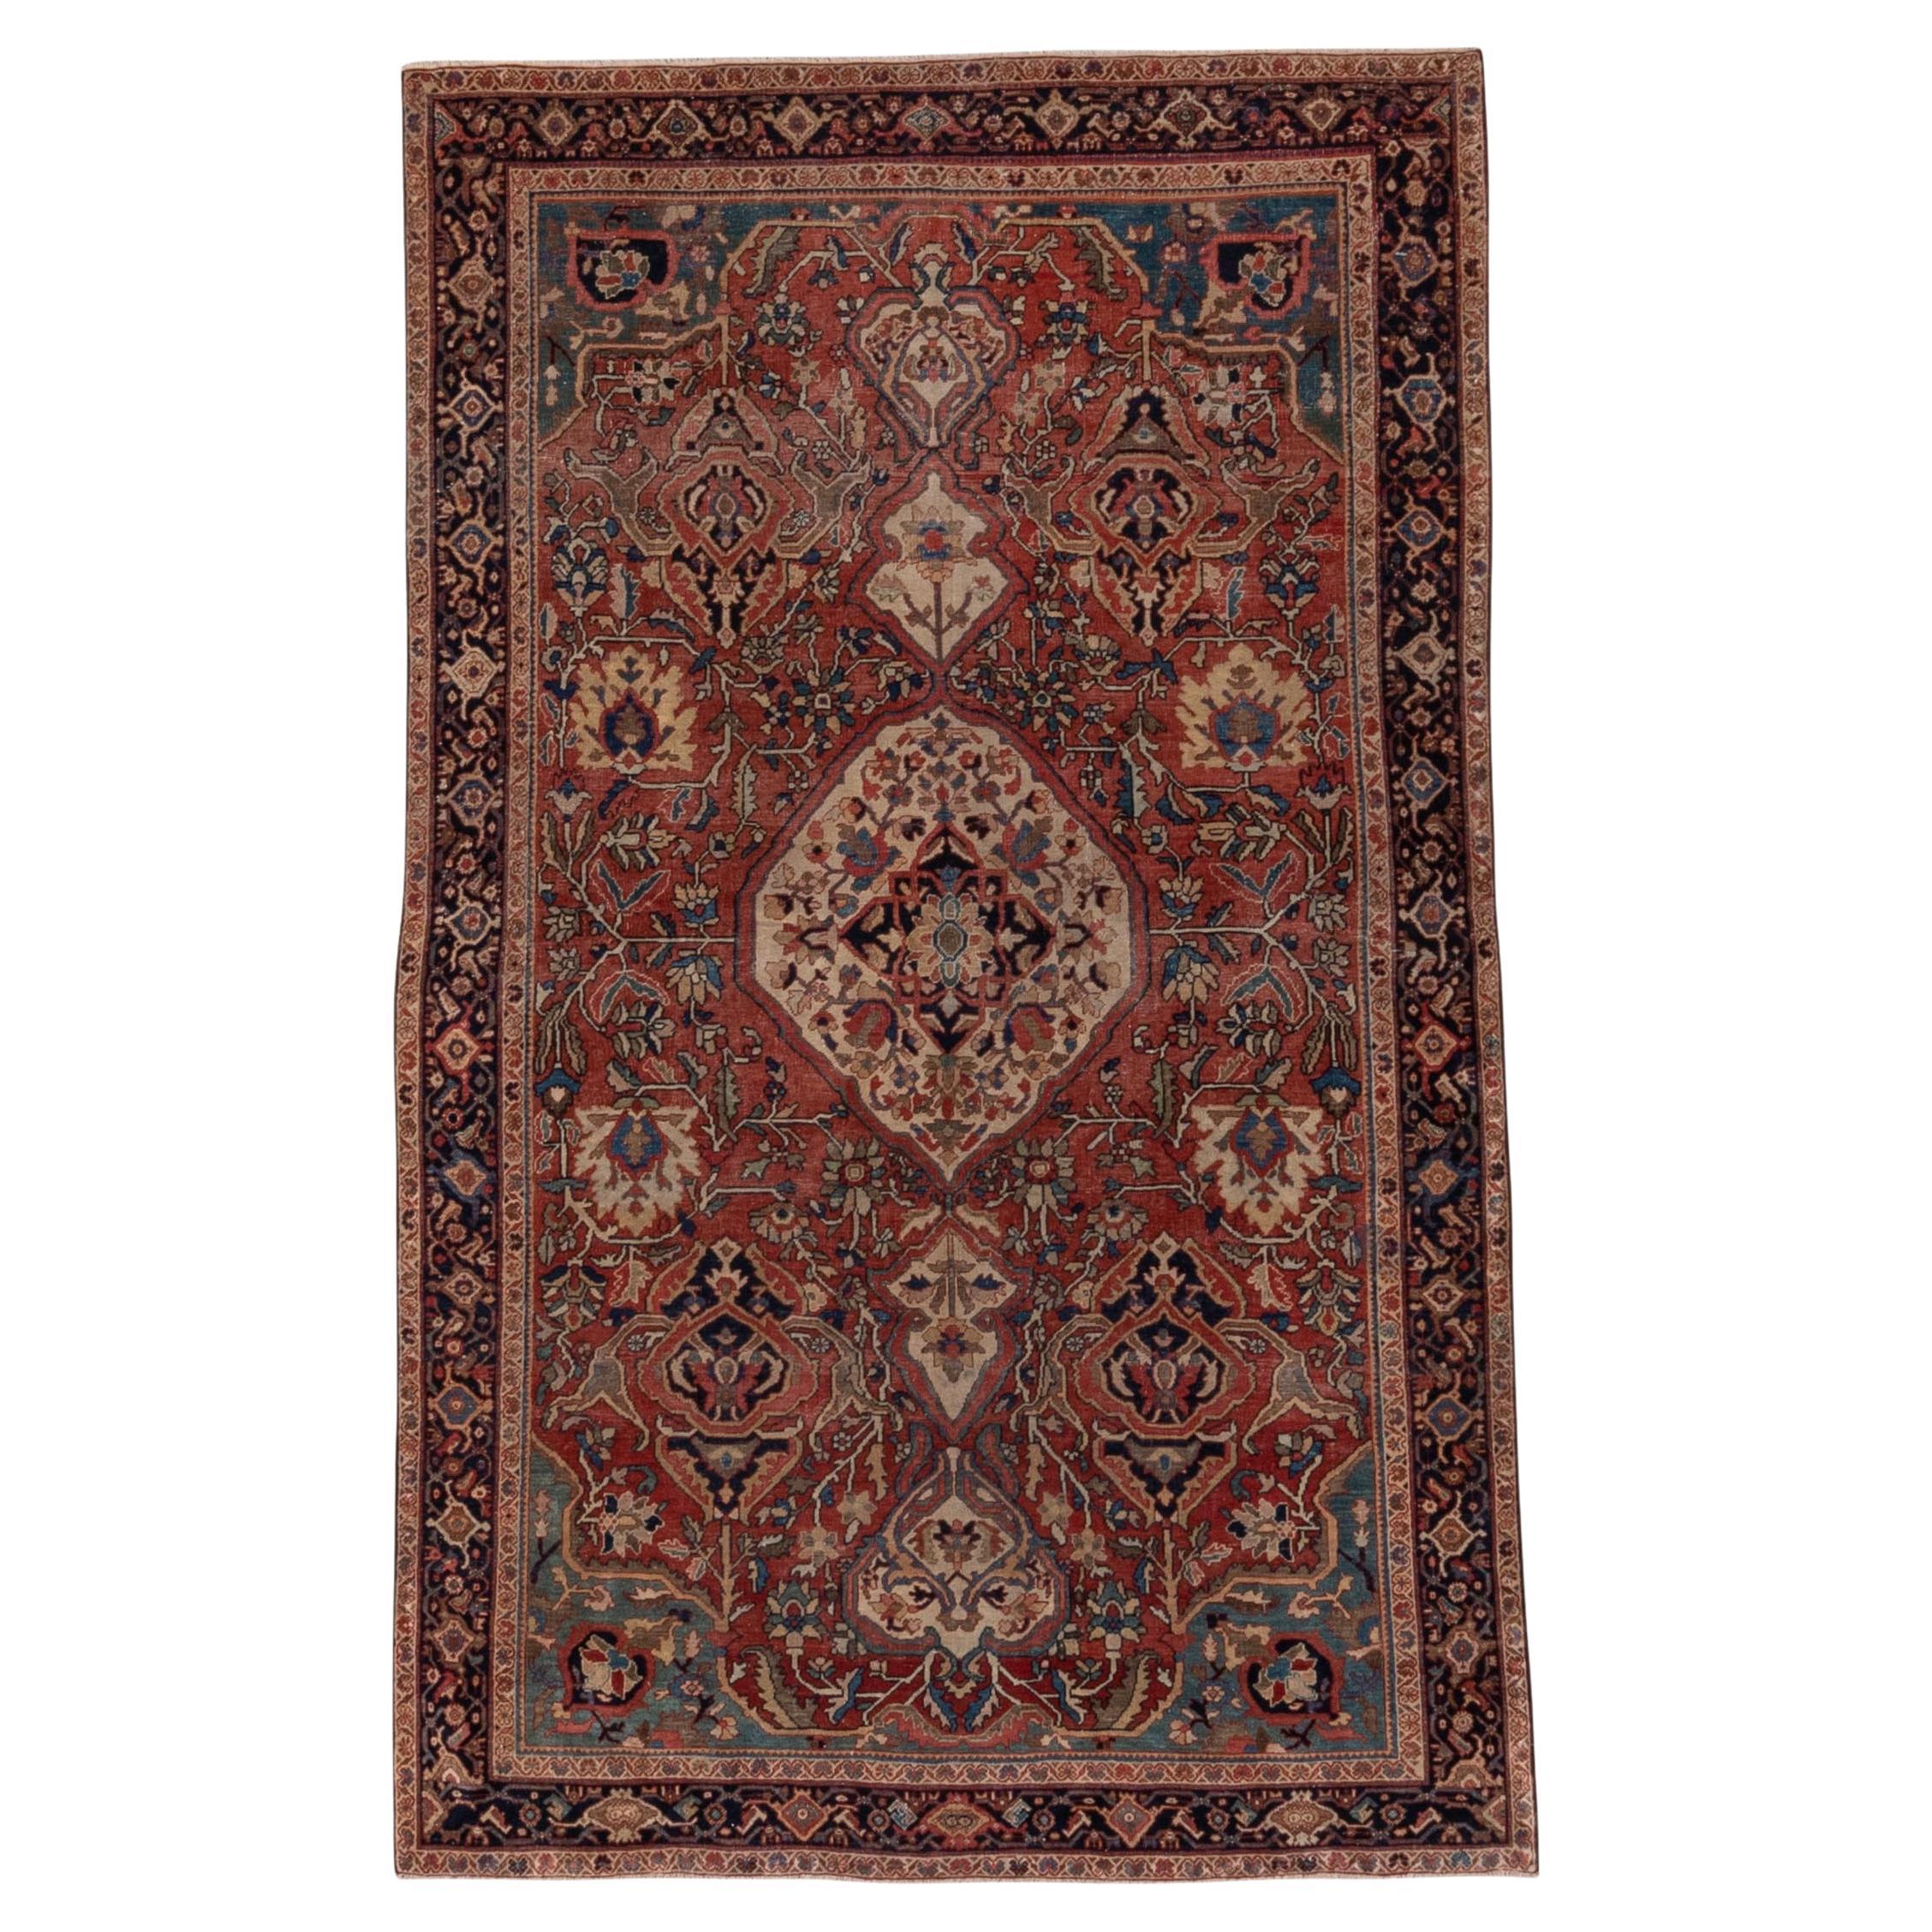 Far Sarouk Persian Rug with Center Medallion in Noir Red 